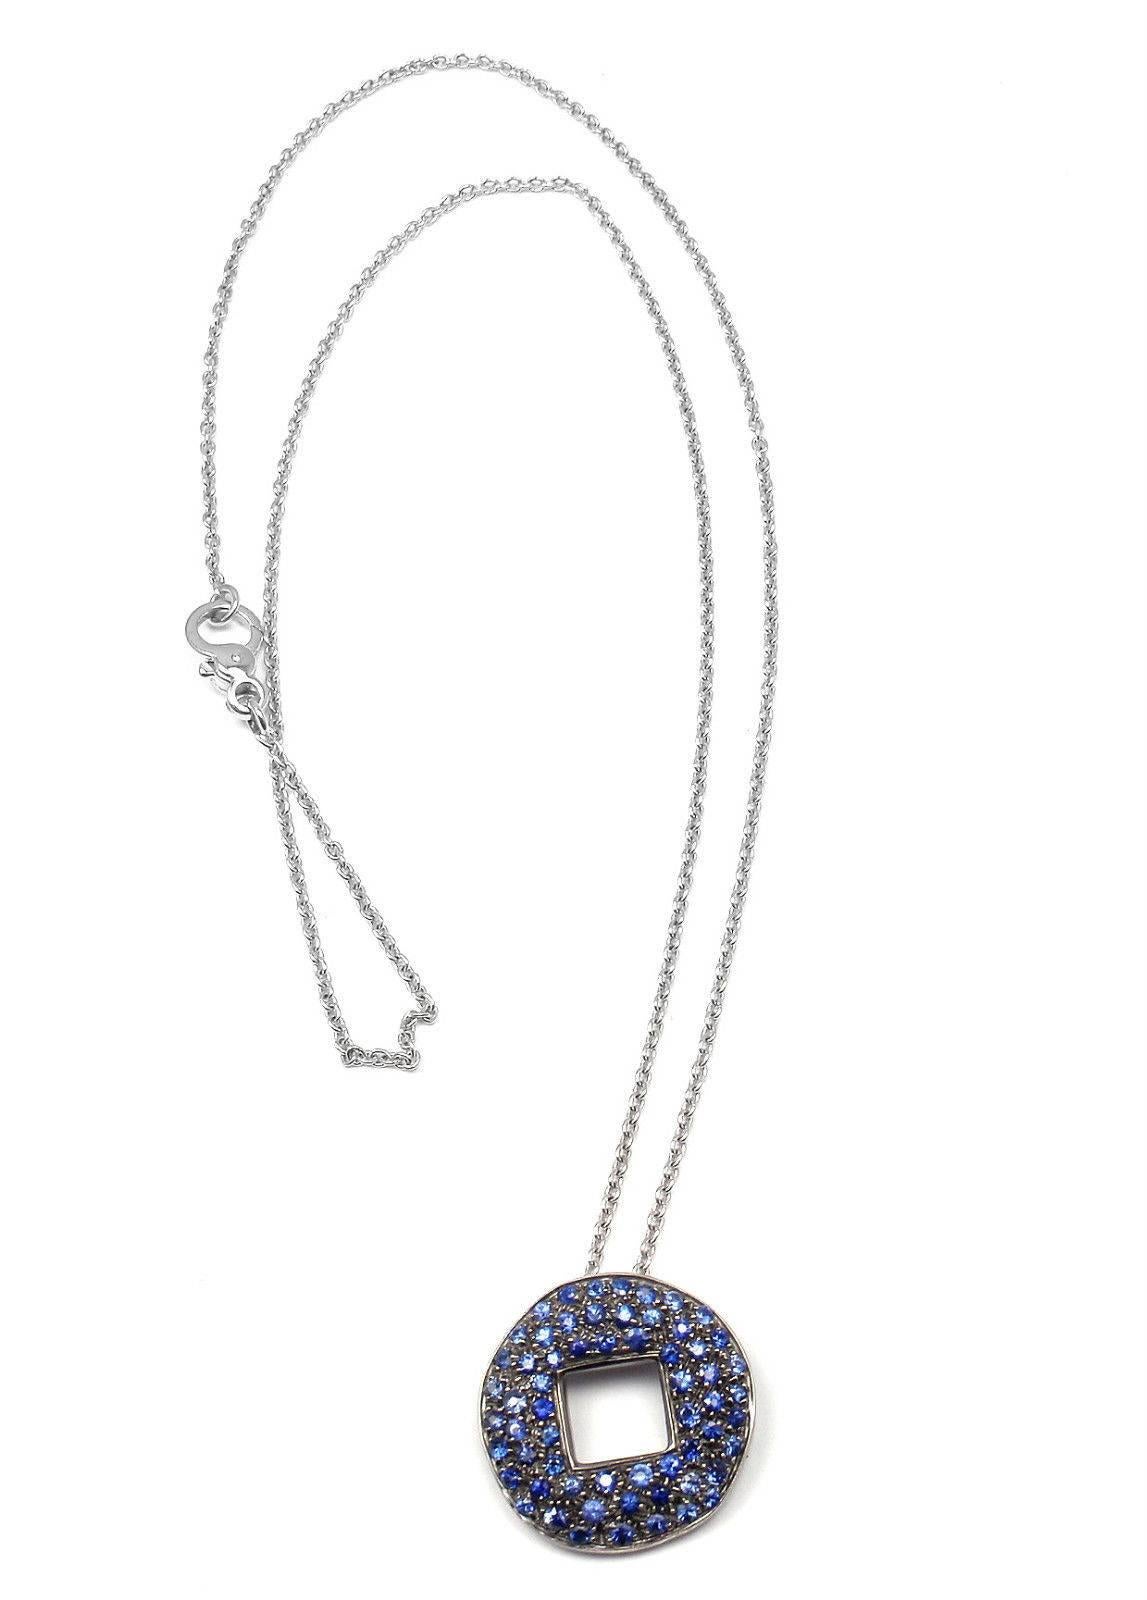 18k White Gold Sapphire Pendant Necklace by Pomellato. 
With Round brilliant cut sapphires.
This necklace comes with original box and certificate.
Details: 
Weight: 9.8 grams
Chain - Length: 16